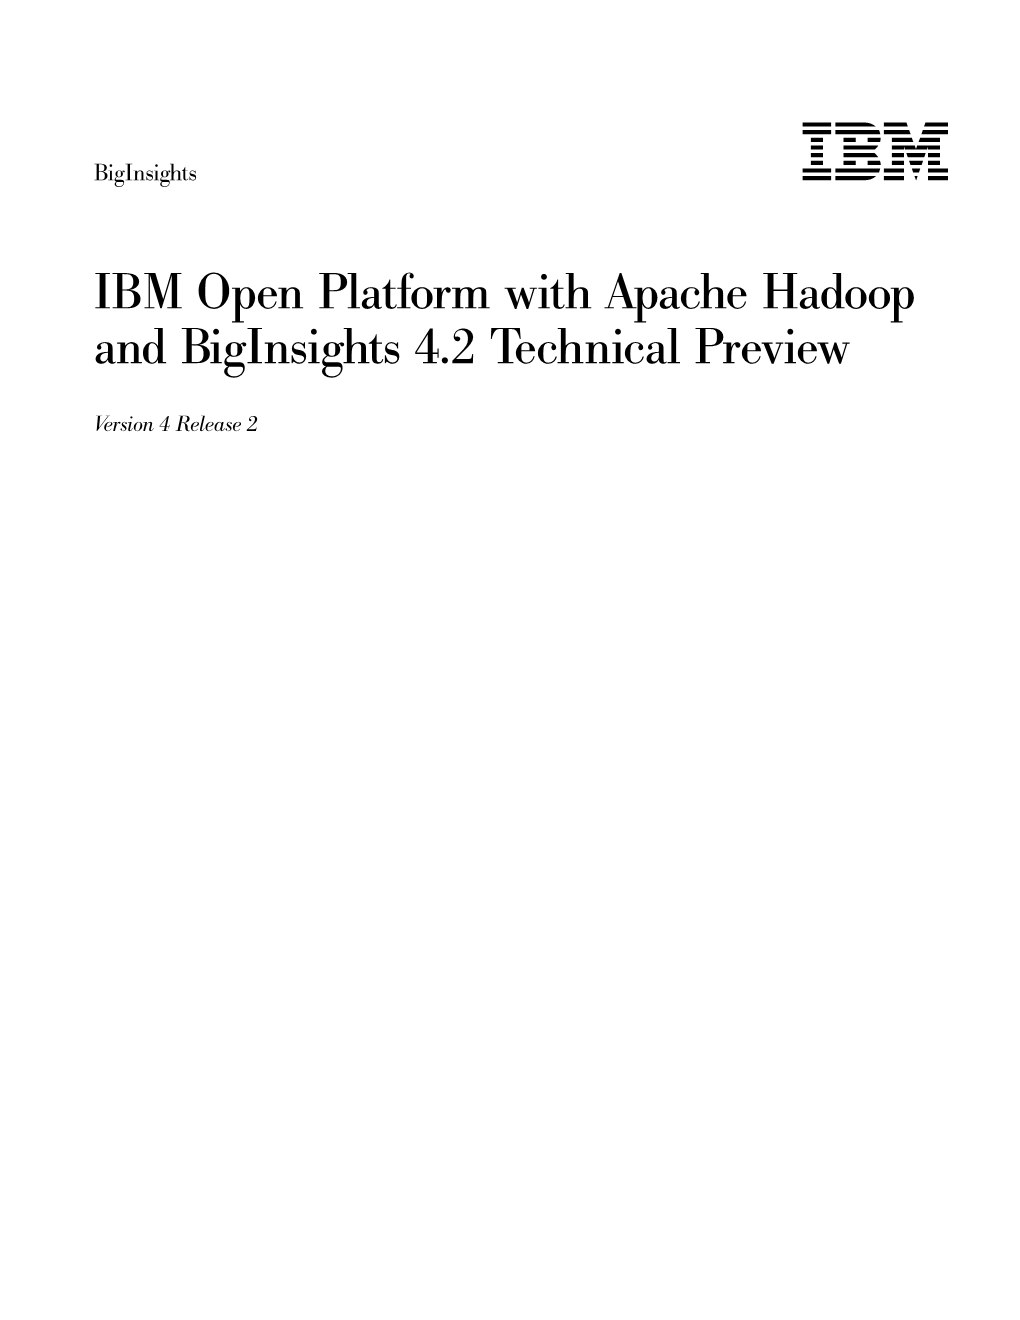 IBM Open Platform with Apache Hadoop and Biginsights 4.2 Technical Preview